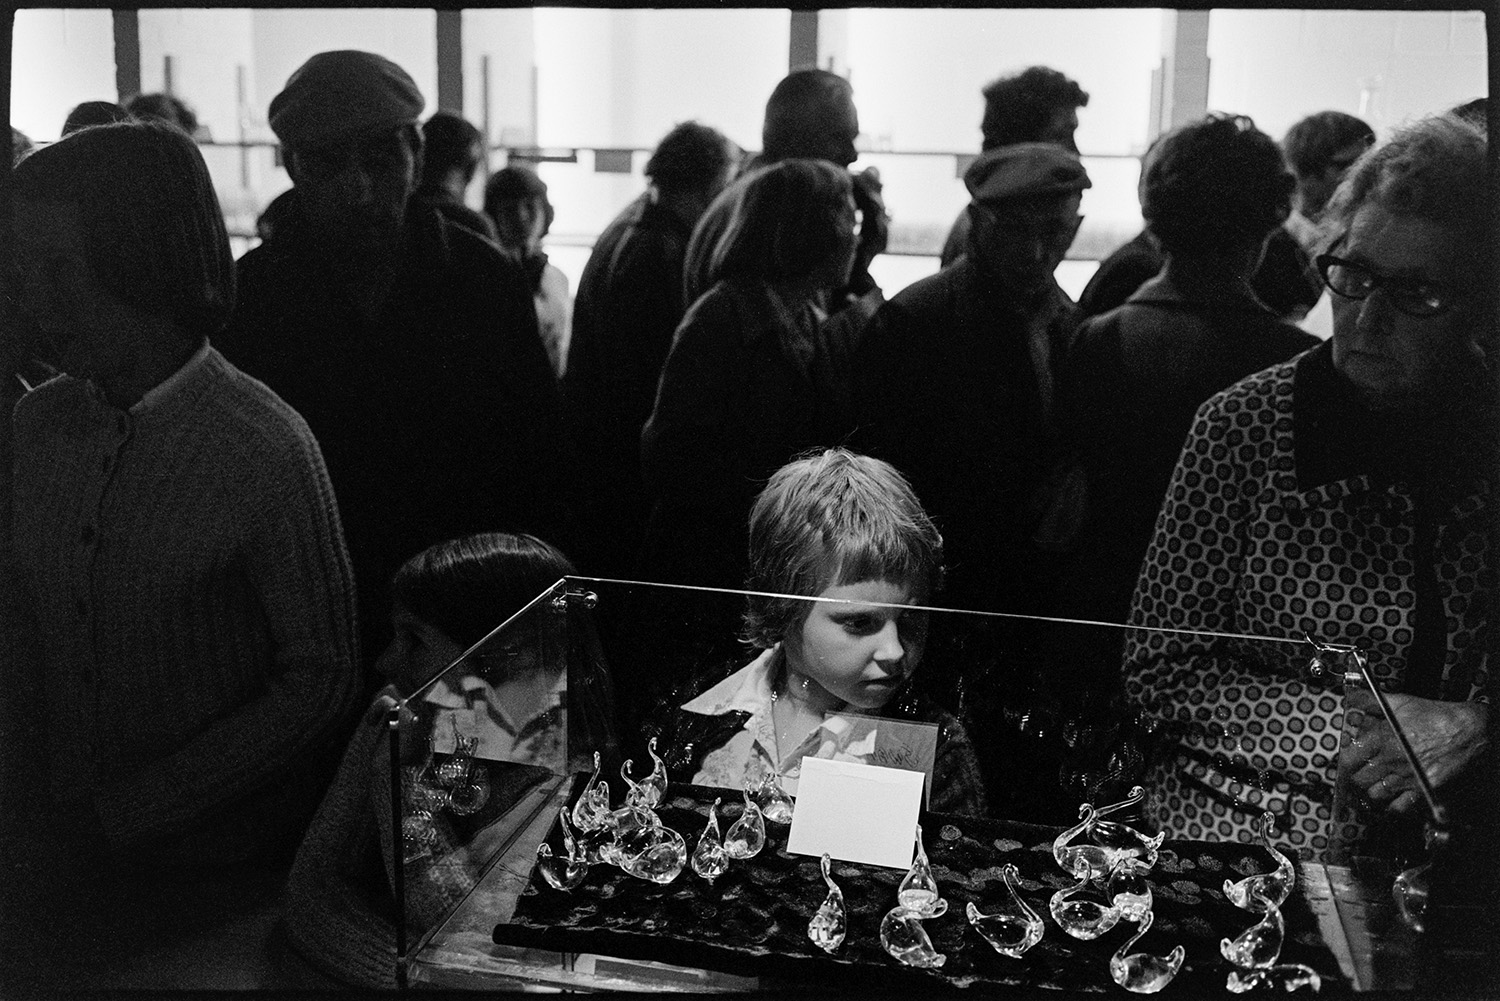 Management and workers at glass factory. 
[A boy looking at a display of glass swans for sale in the shop at the Dartington Glass factory, now known as Dartington Crystal,  in Torrington. Other customers can be seen in the background.]